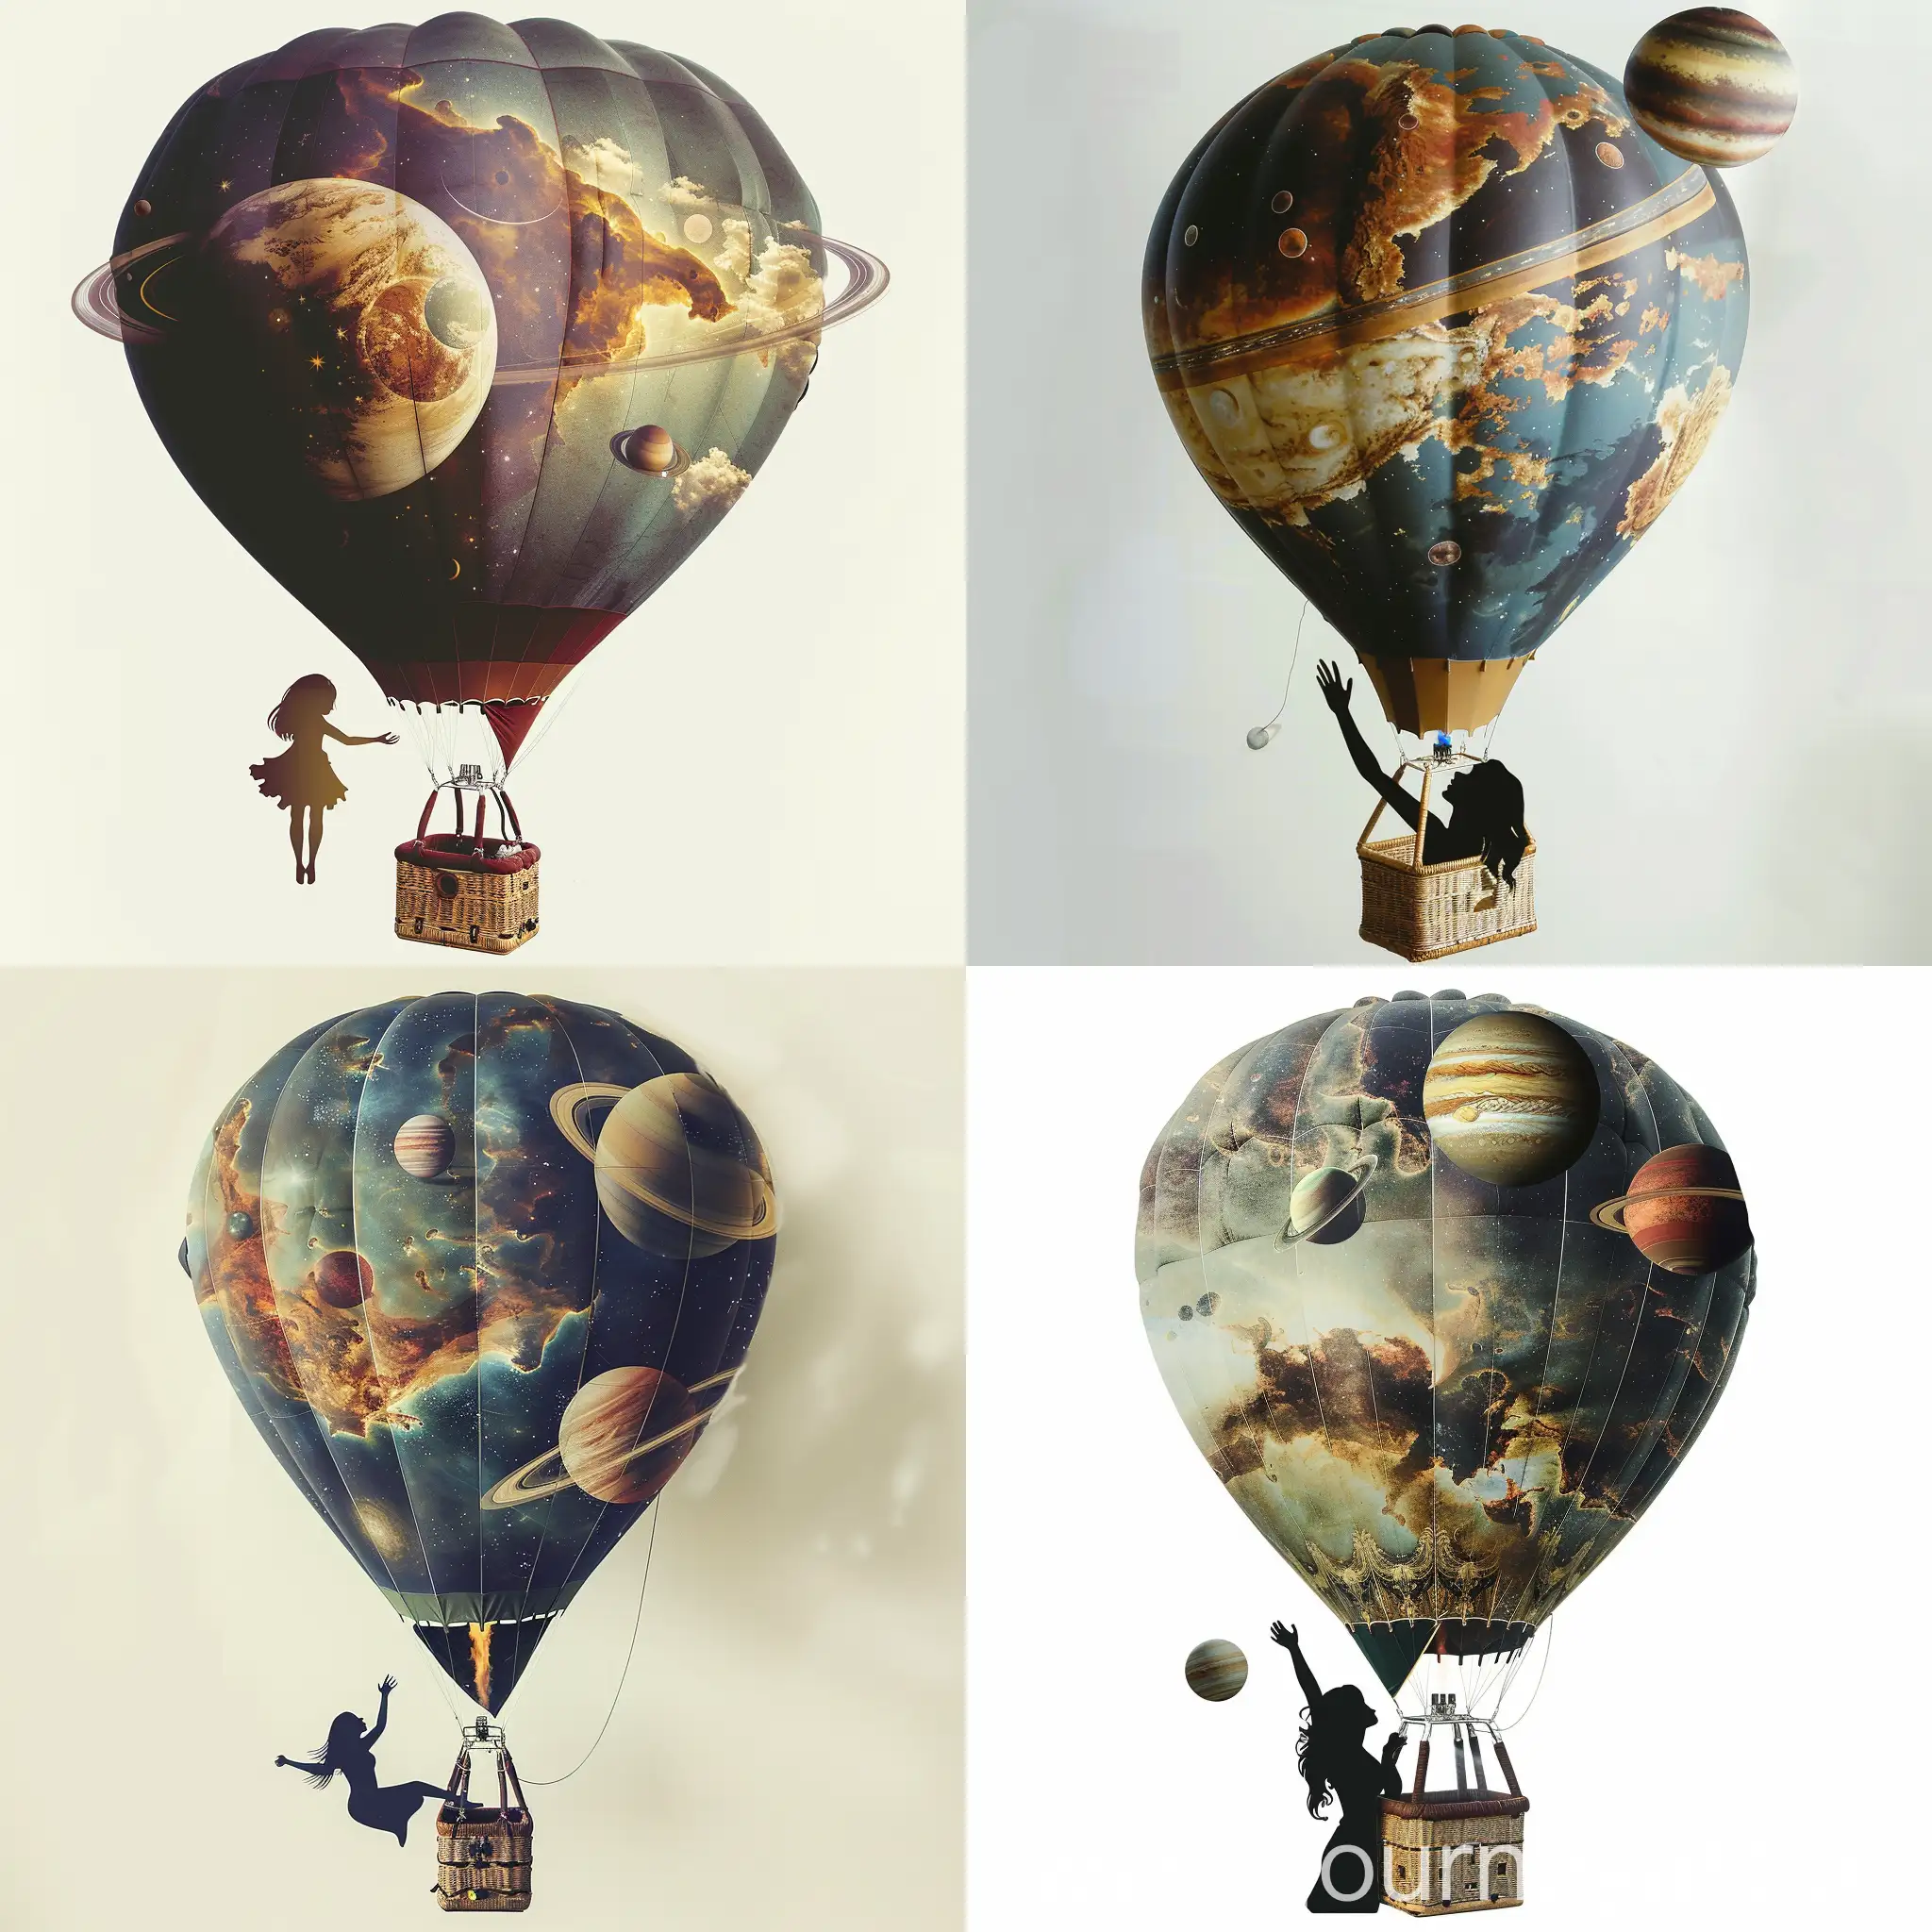 Exploring-Space-in-a-Hot-Air-Balloon-Woman-Reaching-for-Planets